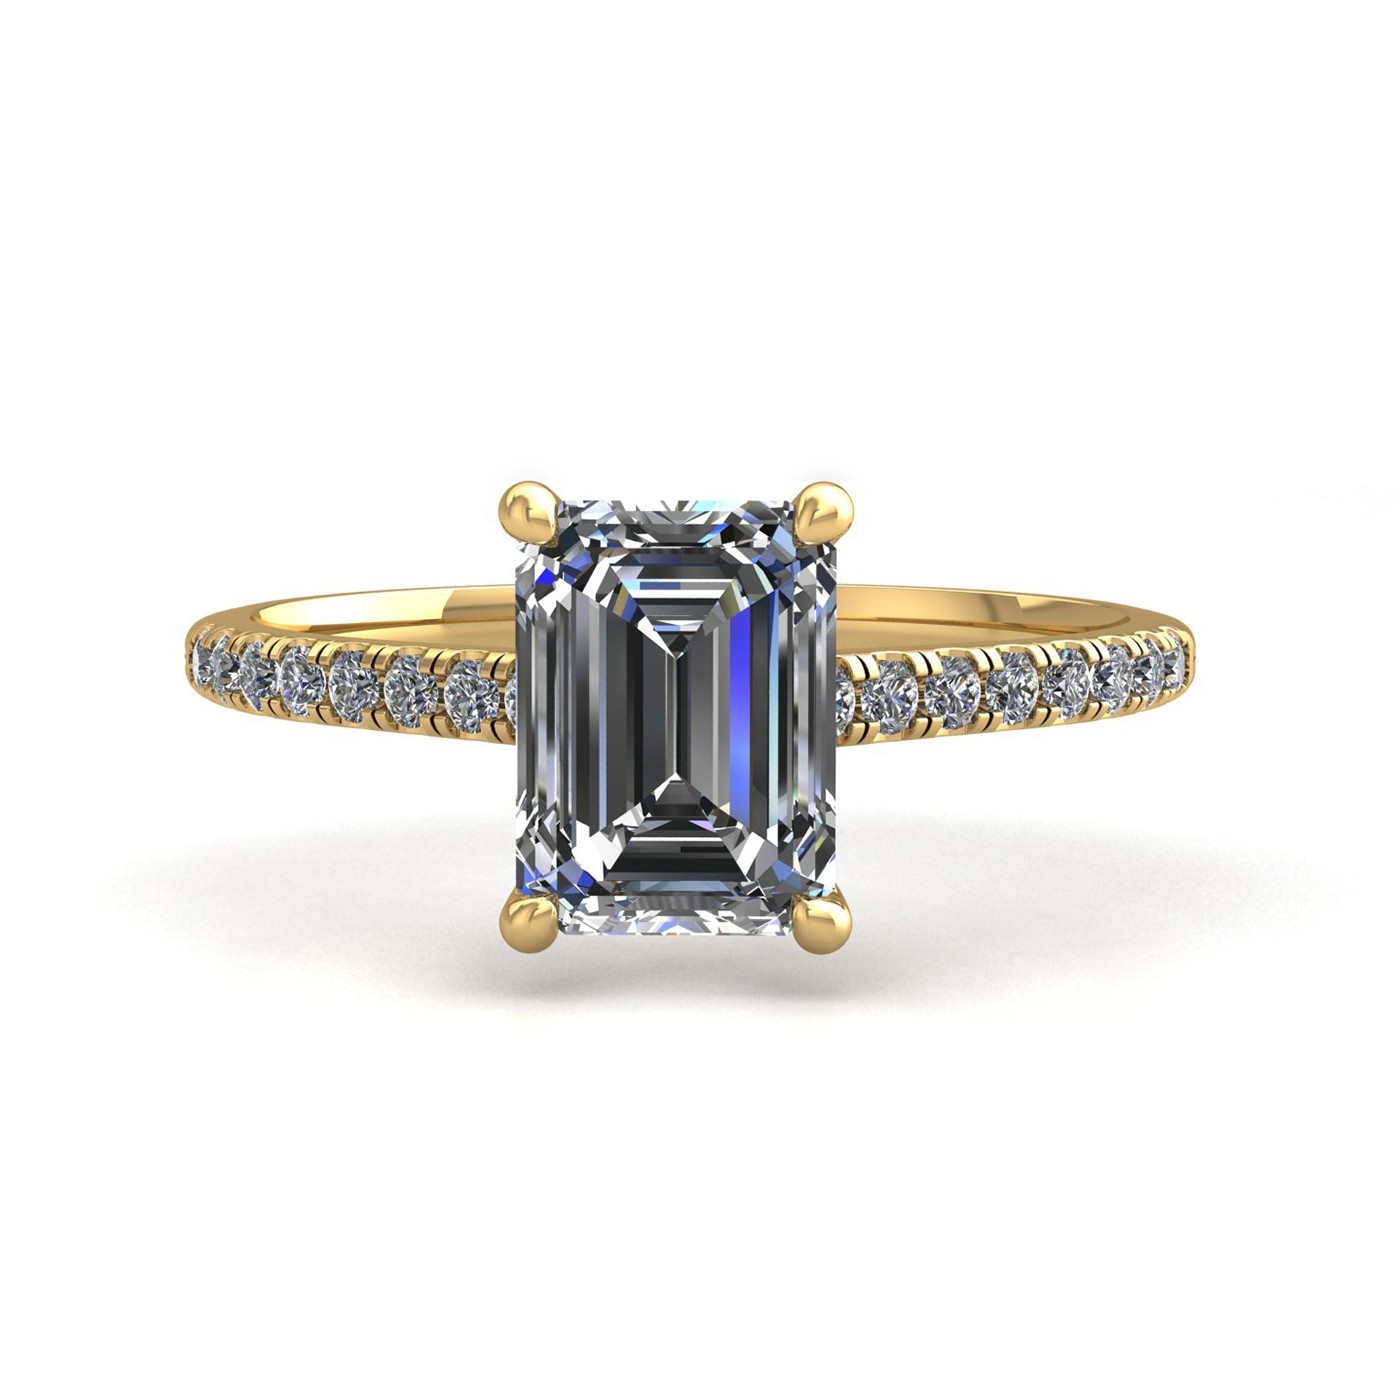 18k yellow gold  0,50 ct 4 prongs emerald cut diamond engagement ring with whisper thin pavÉ set band Photos & images